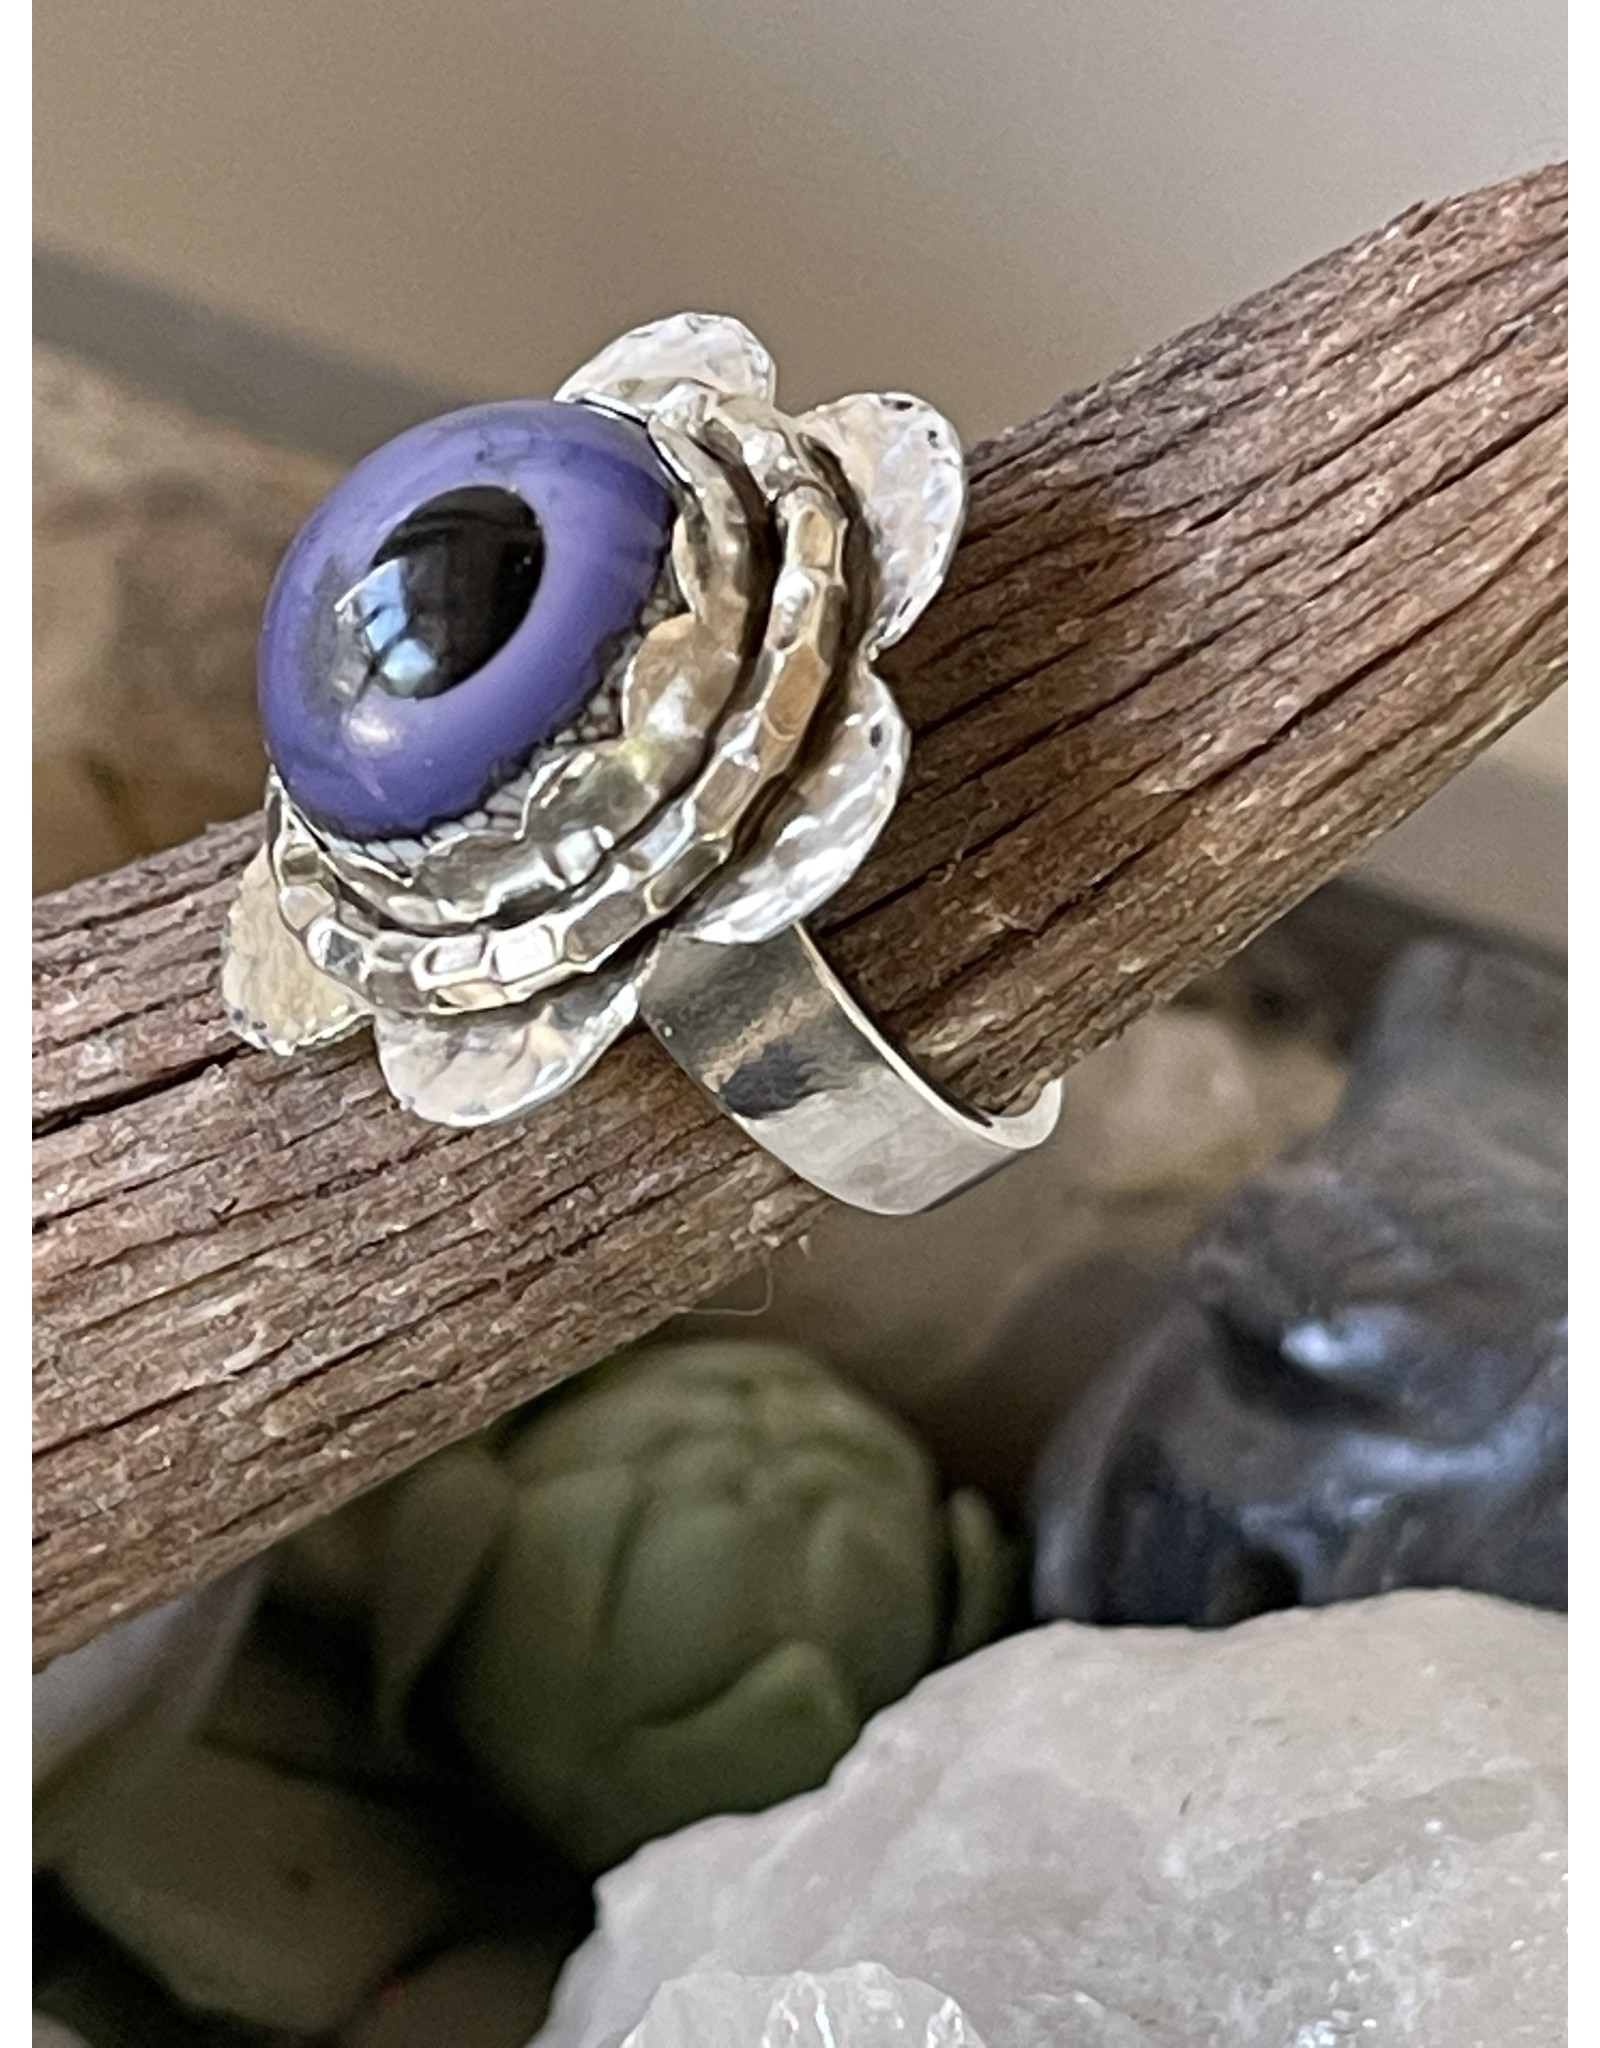 Annette Colby - Jeweler Lampwork Glass Purple Eye Ring Size 6.75 by Annette Colby